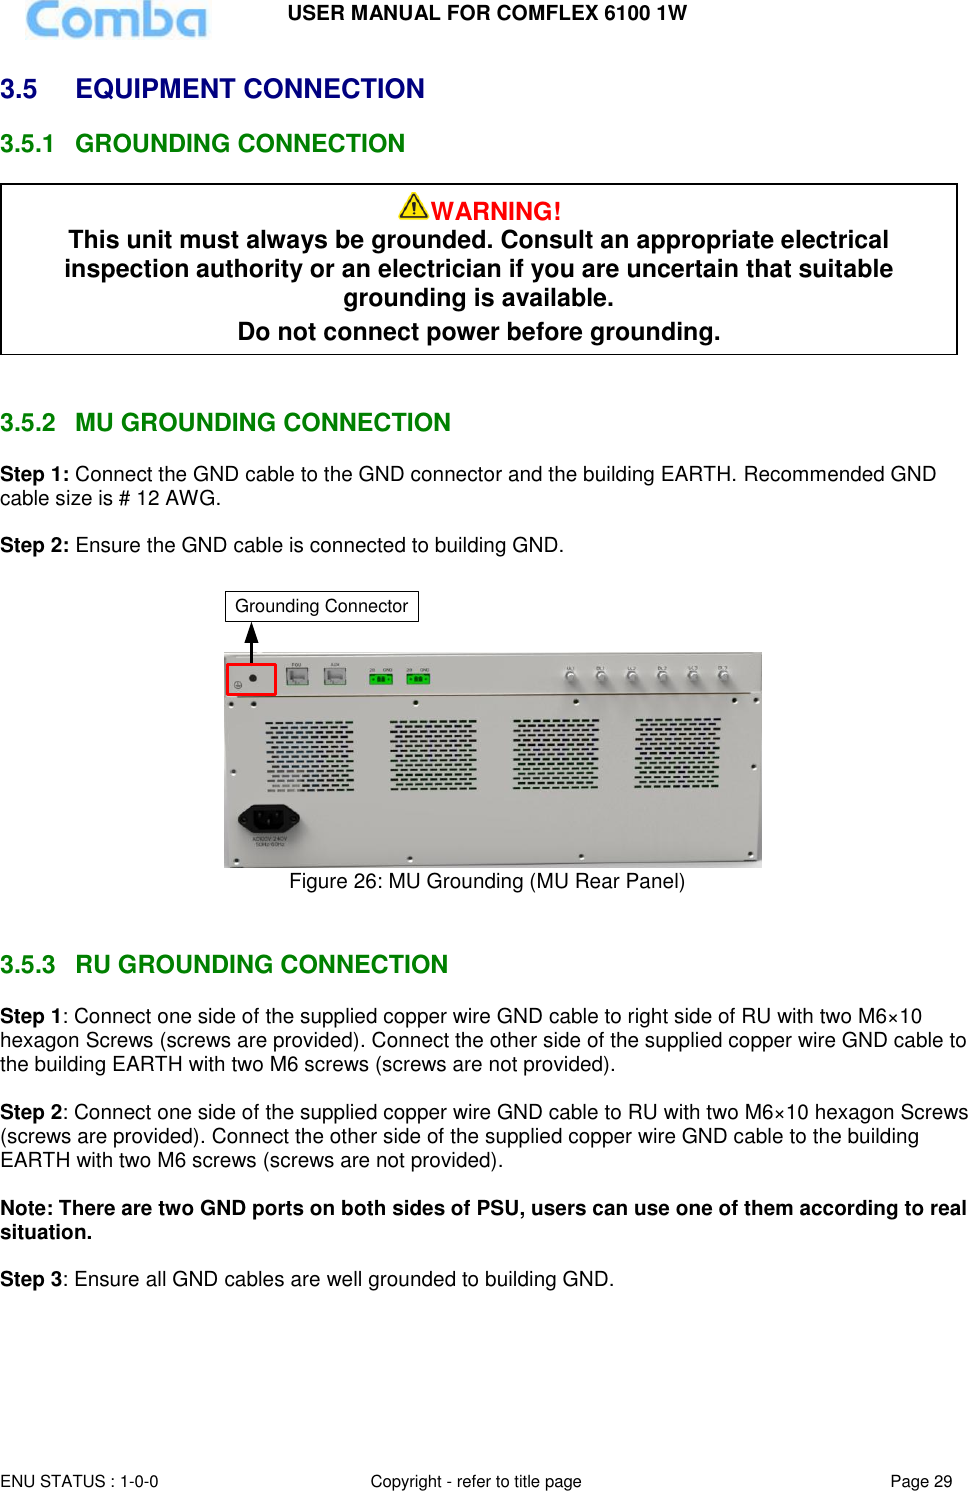 USER MANUAL FOR COMFLEX 6100 1W  ENU STATUS : 1-0-0 Copyright - refer to title page Page 29     3.5  EQUIPMENT CONNECTION  3.5.1  GROUNDING CONNECTION    3.5.2  MU GROUNDING CONNECTION Step 1: Connect the GND cable to the GND connector and the building EARTH. Recommended GND cable size is # 12 AWG.  Step 2: Ensure the GND cable is connected to building GND.  Grounding Connector Figure 26: MU Grounding (MU Rear Panel)   3.5.3  RU GROUNDING CONNECTION Step 1: Connect one side of the supplied copper wire GND cable to right side of RU with two M6×10 hexagon Screws (screws are provided). Connect the other side of the supplied copper wire GND cable to the building EARTH with two M6 screws (screws are not provided).  Step 2: Connect one side of the supplied copper wire GND cable to RU with two M6×10 hexagon Screws (screws are provided). Connect the other side of the supplied copper wire GND cable to the building EARTH with two M6 screws (screws are not provided).  Note: There are two GND ports on both sides of PSU, users can use one of them according to real situation.  Step 3: Ensure all GND cables are well grounded to building GND.  WARNING! This unit must always be grounded. Consult an appropriate electrical inspection authority or an electrician if you are uncertain that suitable grounding is available.   Do not connect power before grounding. 